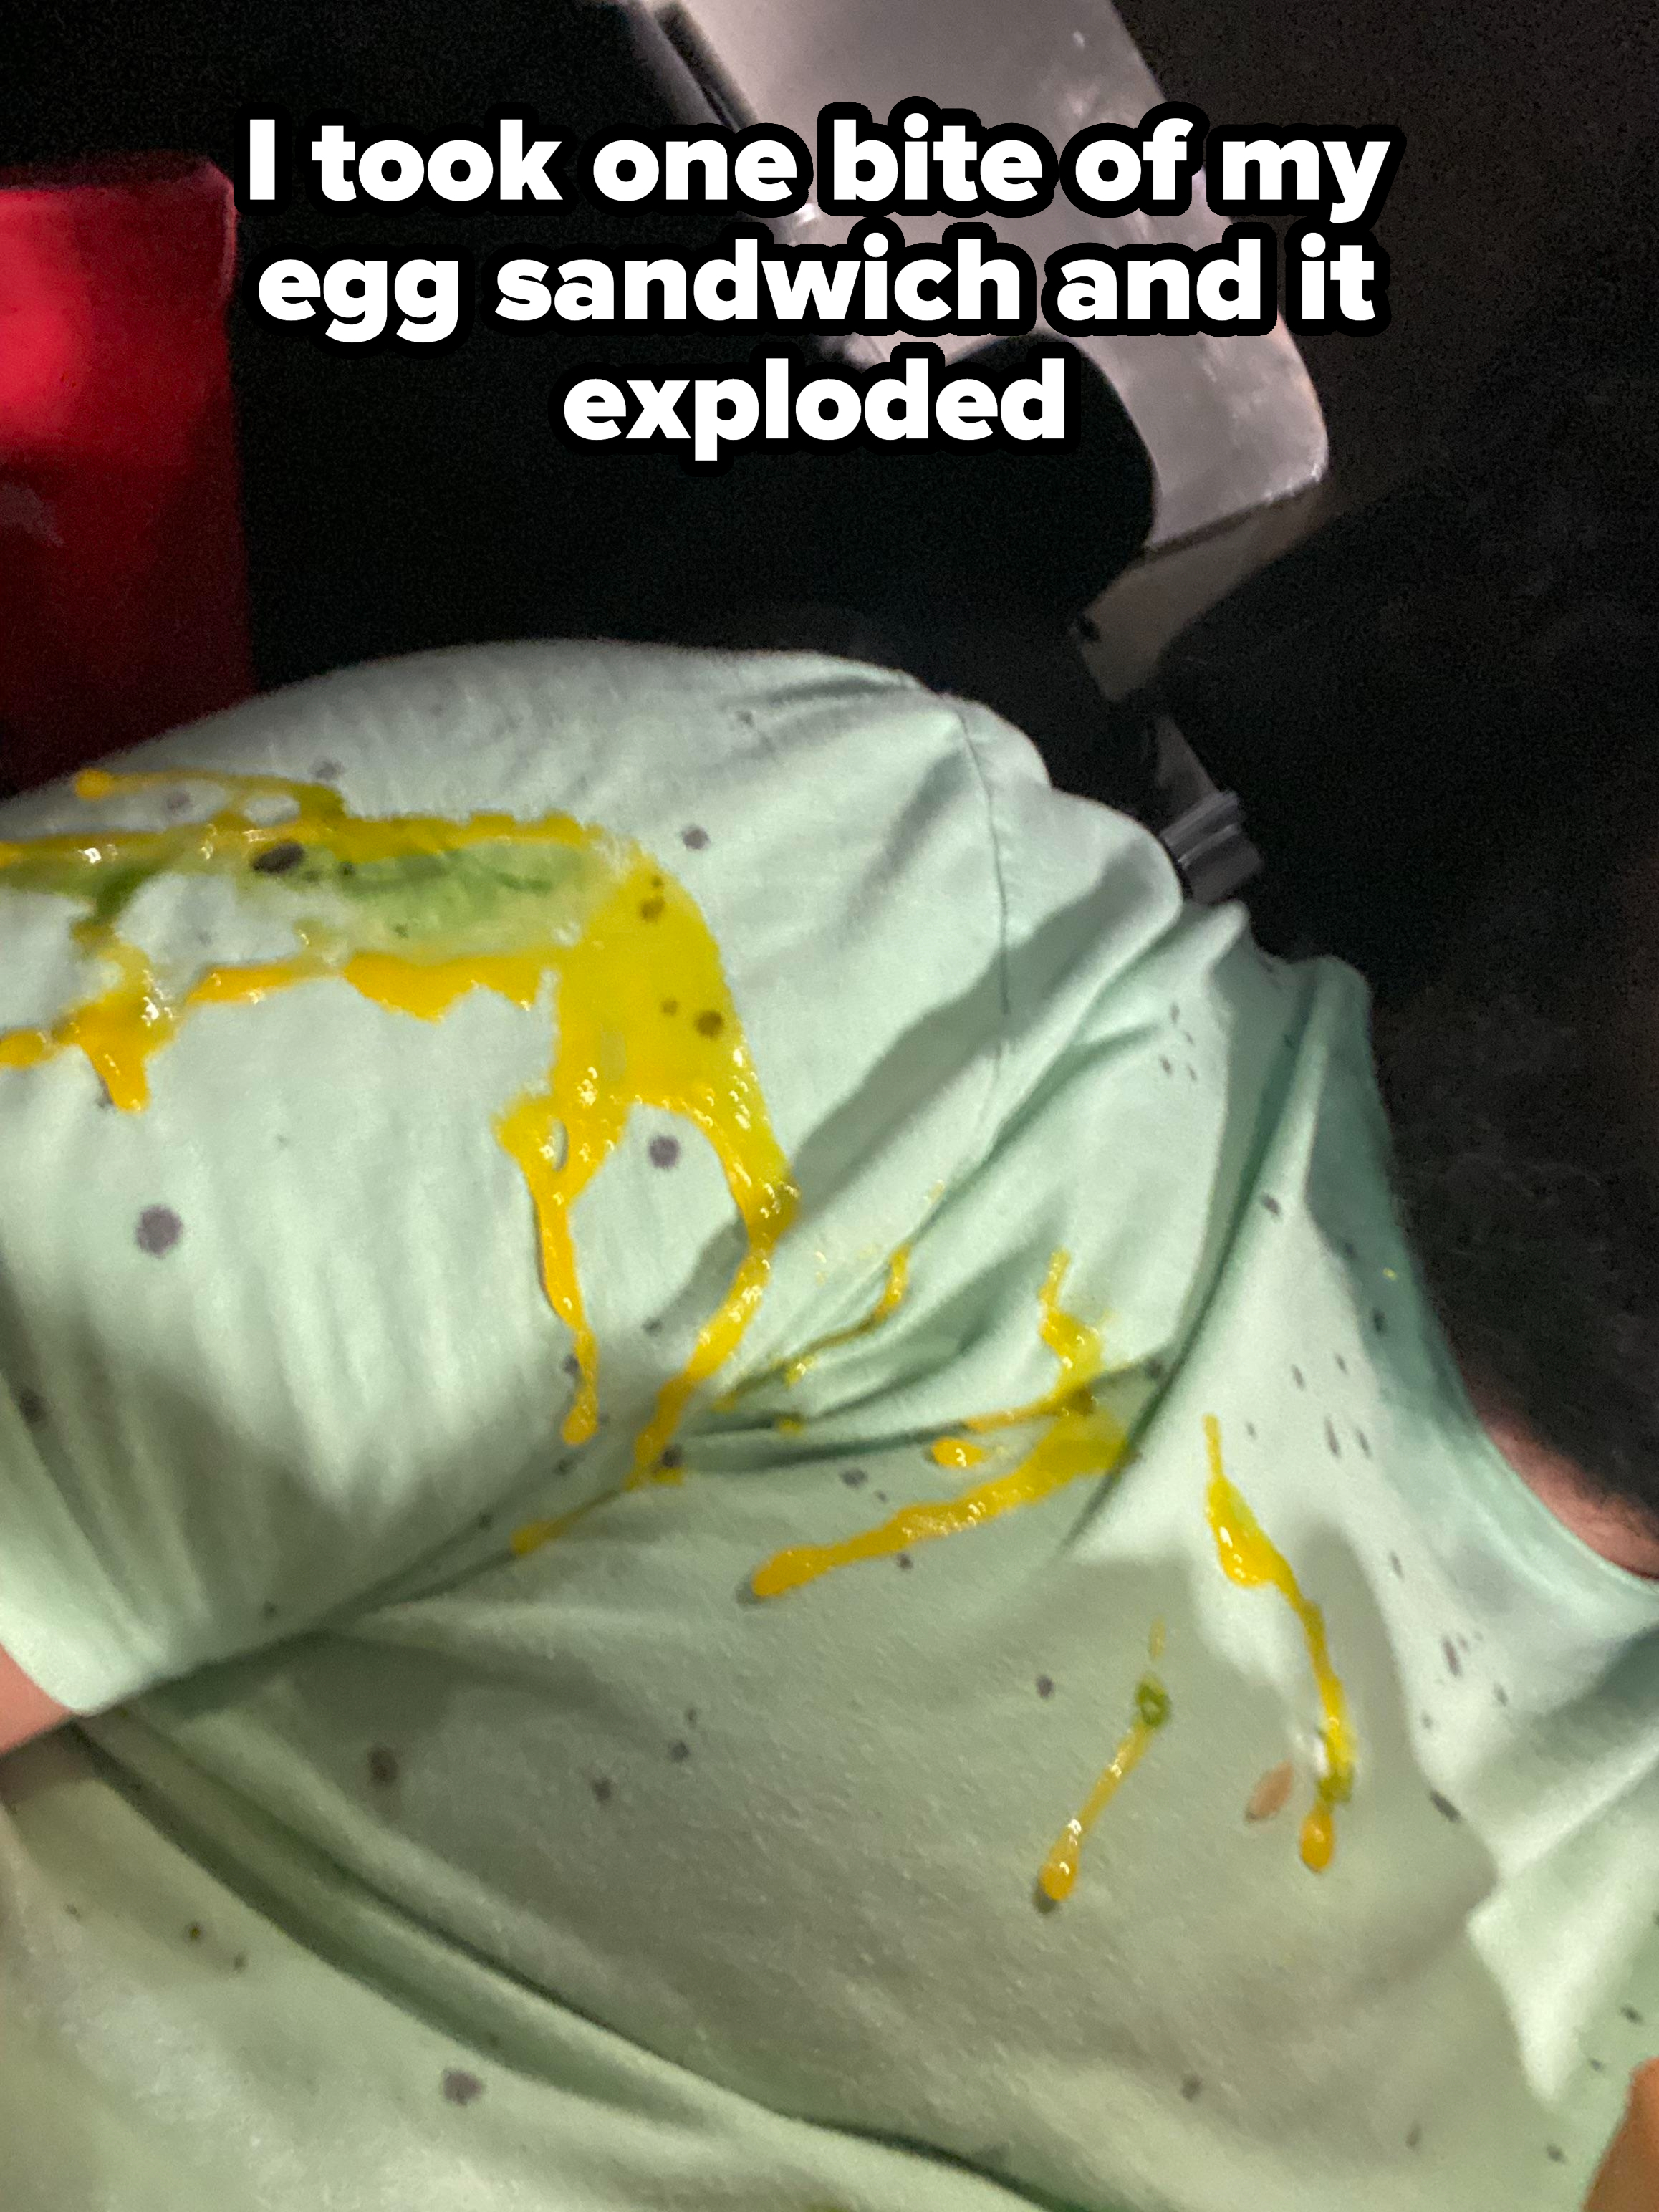 Person in a green shirt with a spilled condiment on it